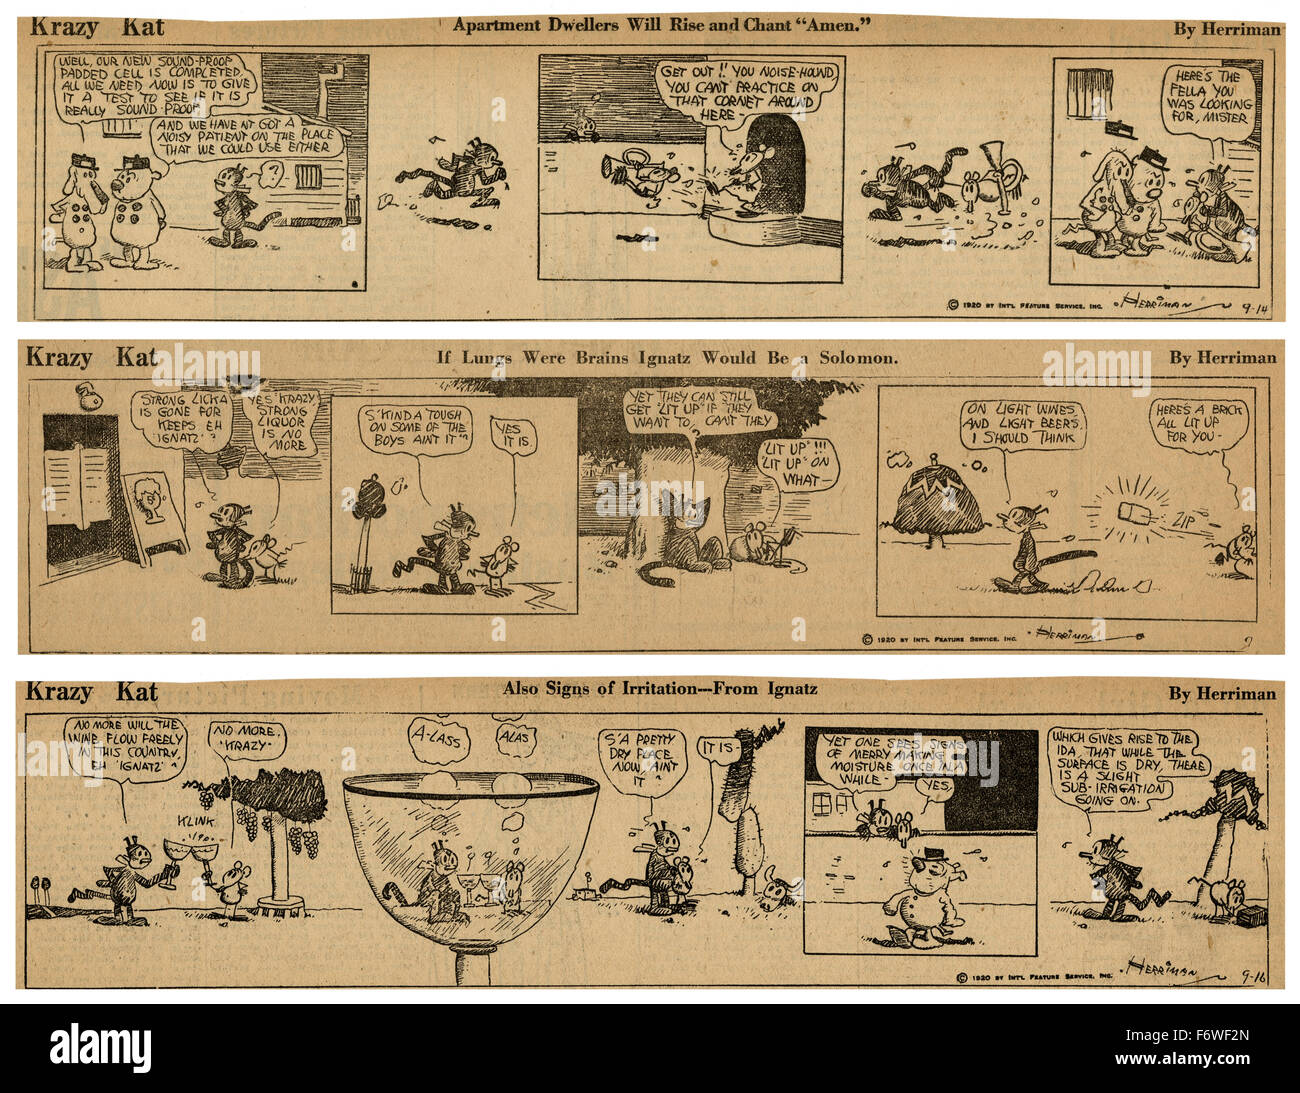 Three 1920 Krazy Kat comic strips by George Herriman, featuring Krazy Kat and Ignatz Mouse. Two strips touch on the idea of Prohibition. Stock Photo